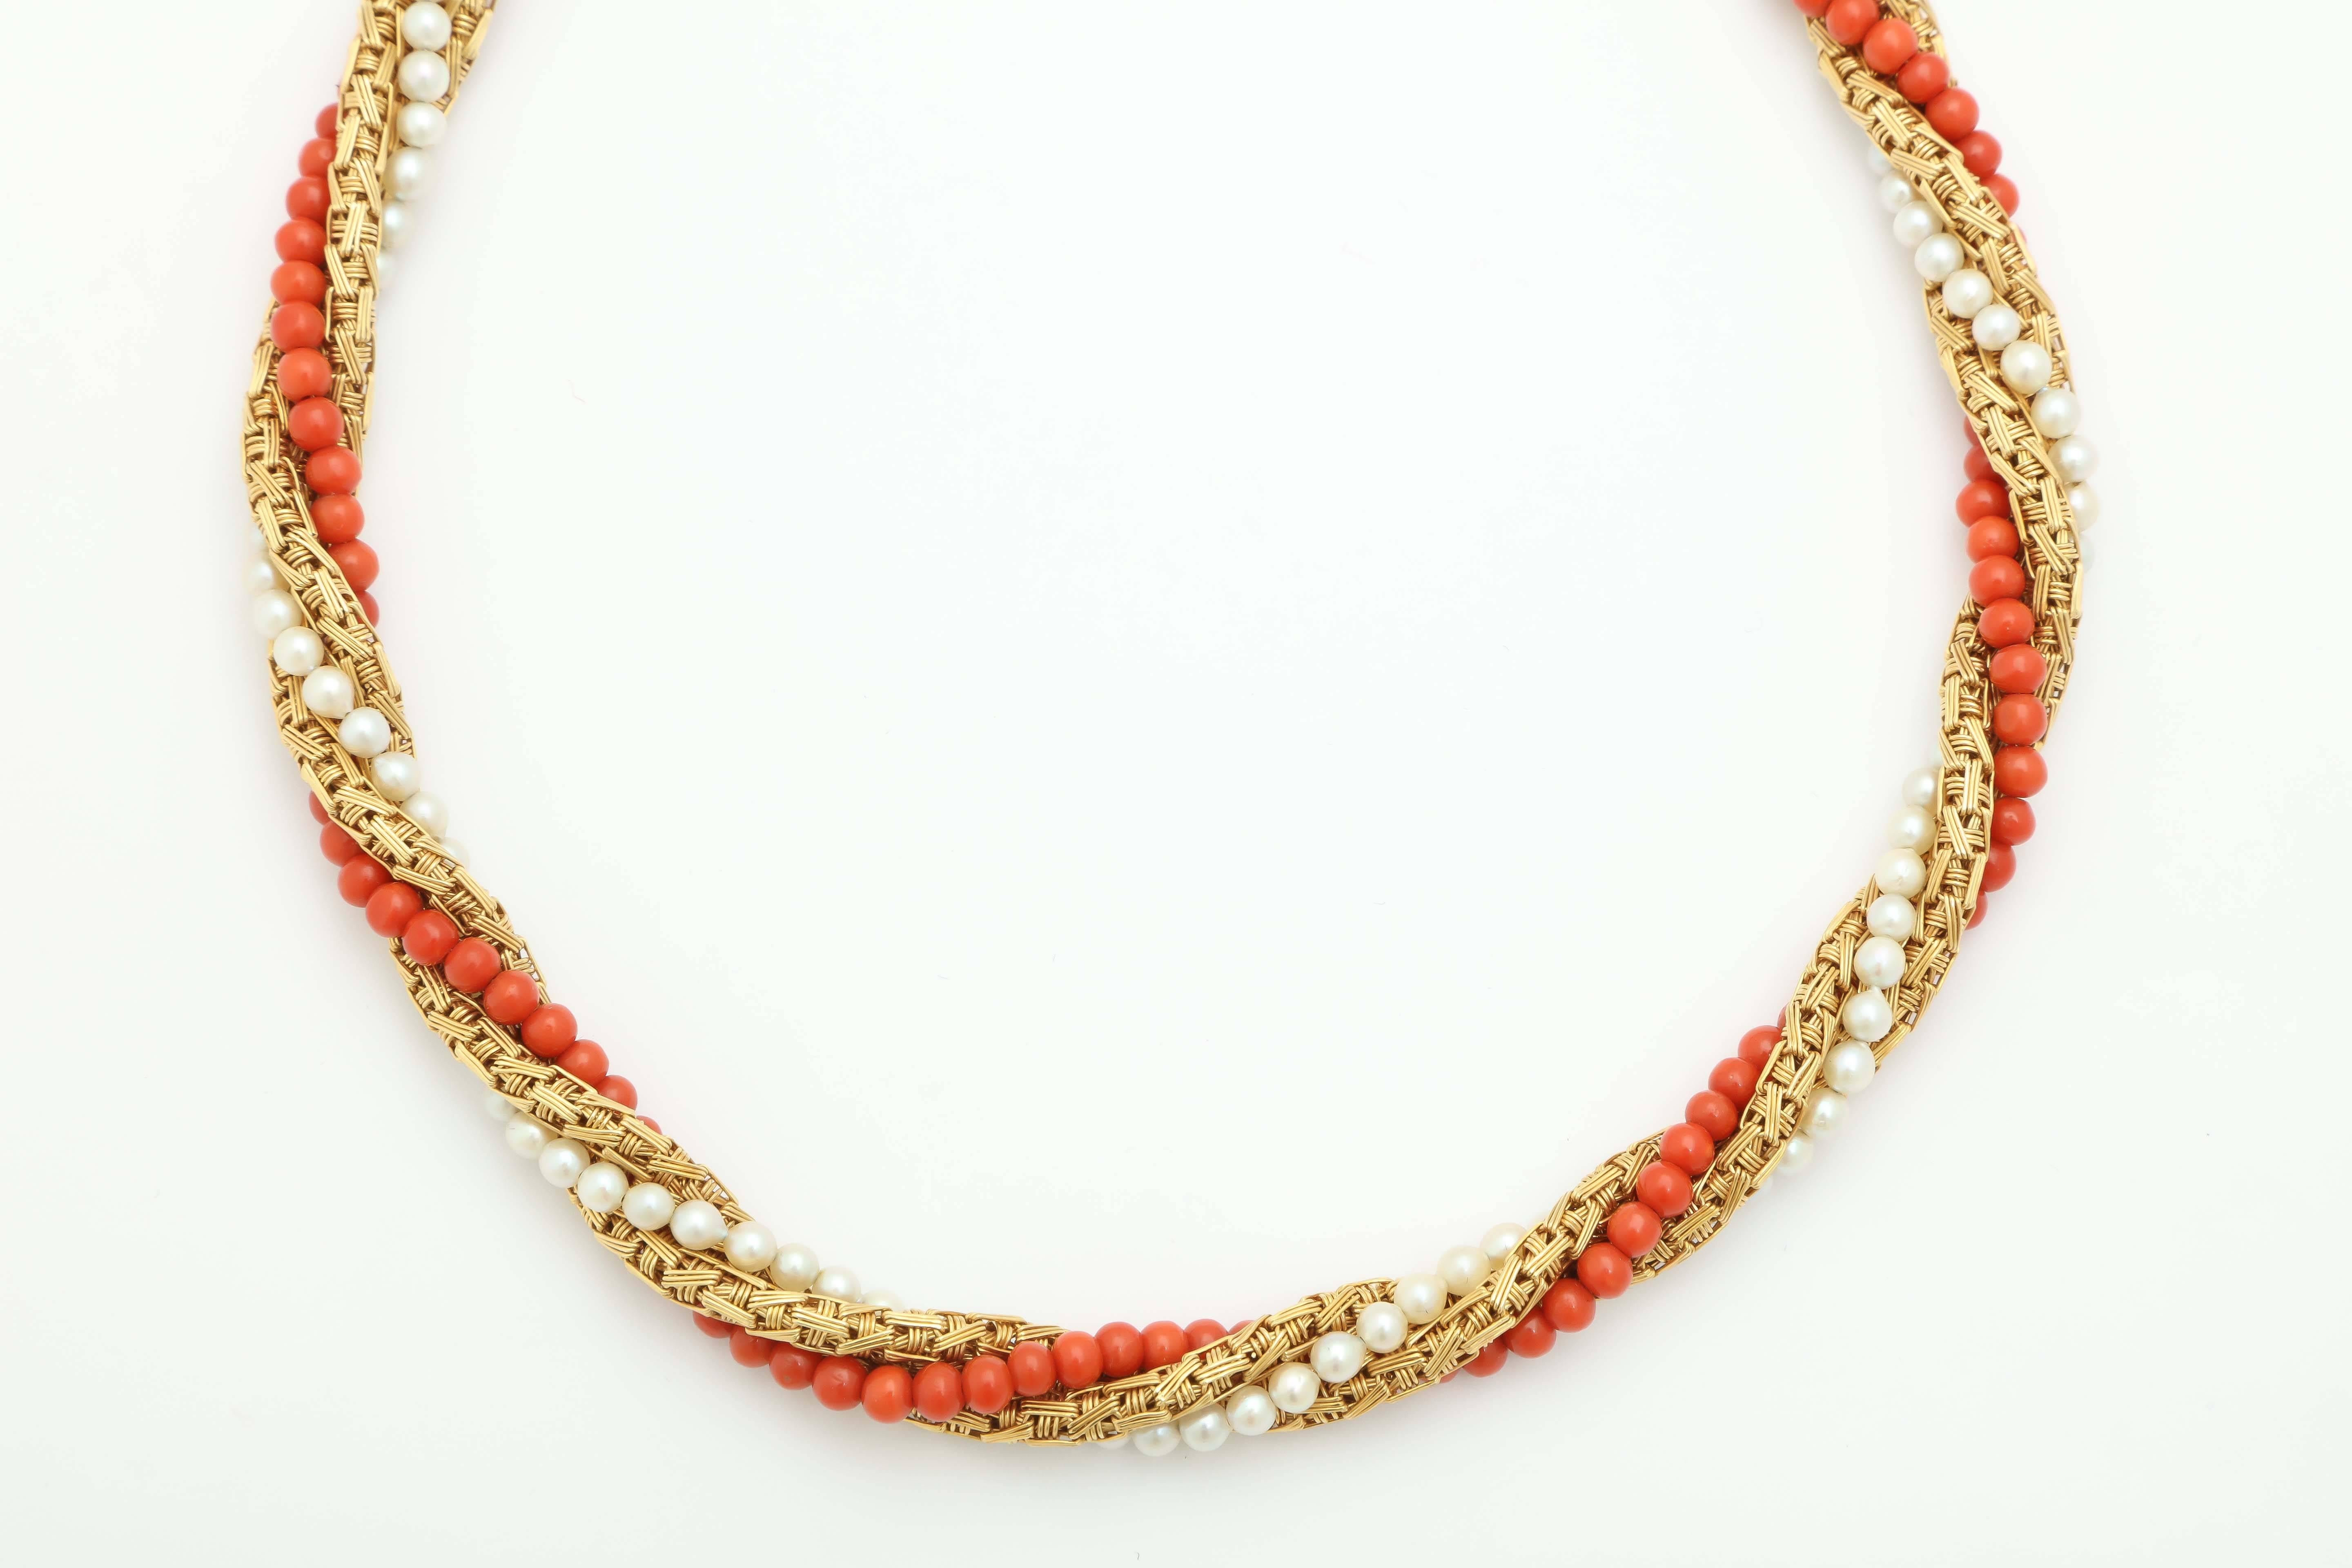 Women's 1960s Coral Pearl Gold Intertwined Twisted Chic Neckace